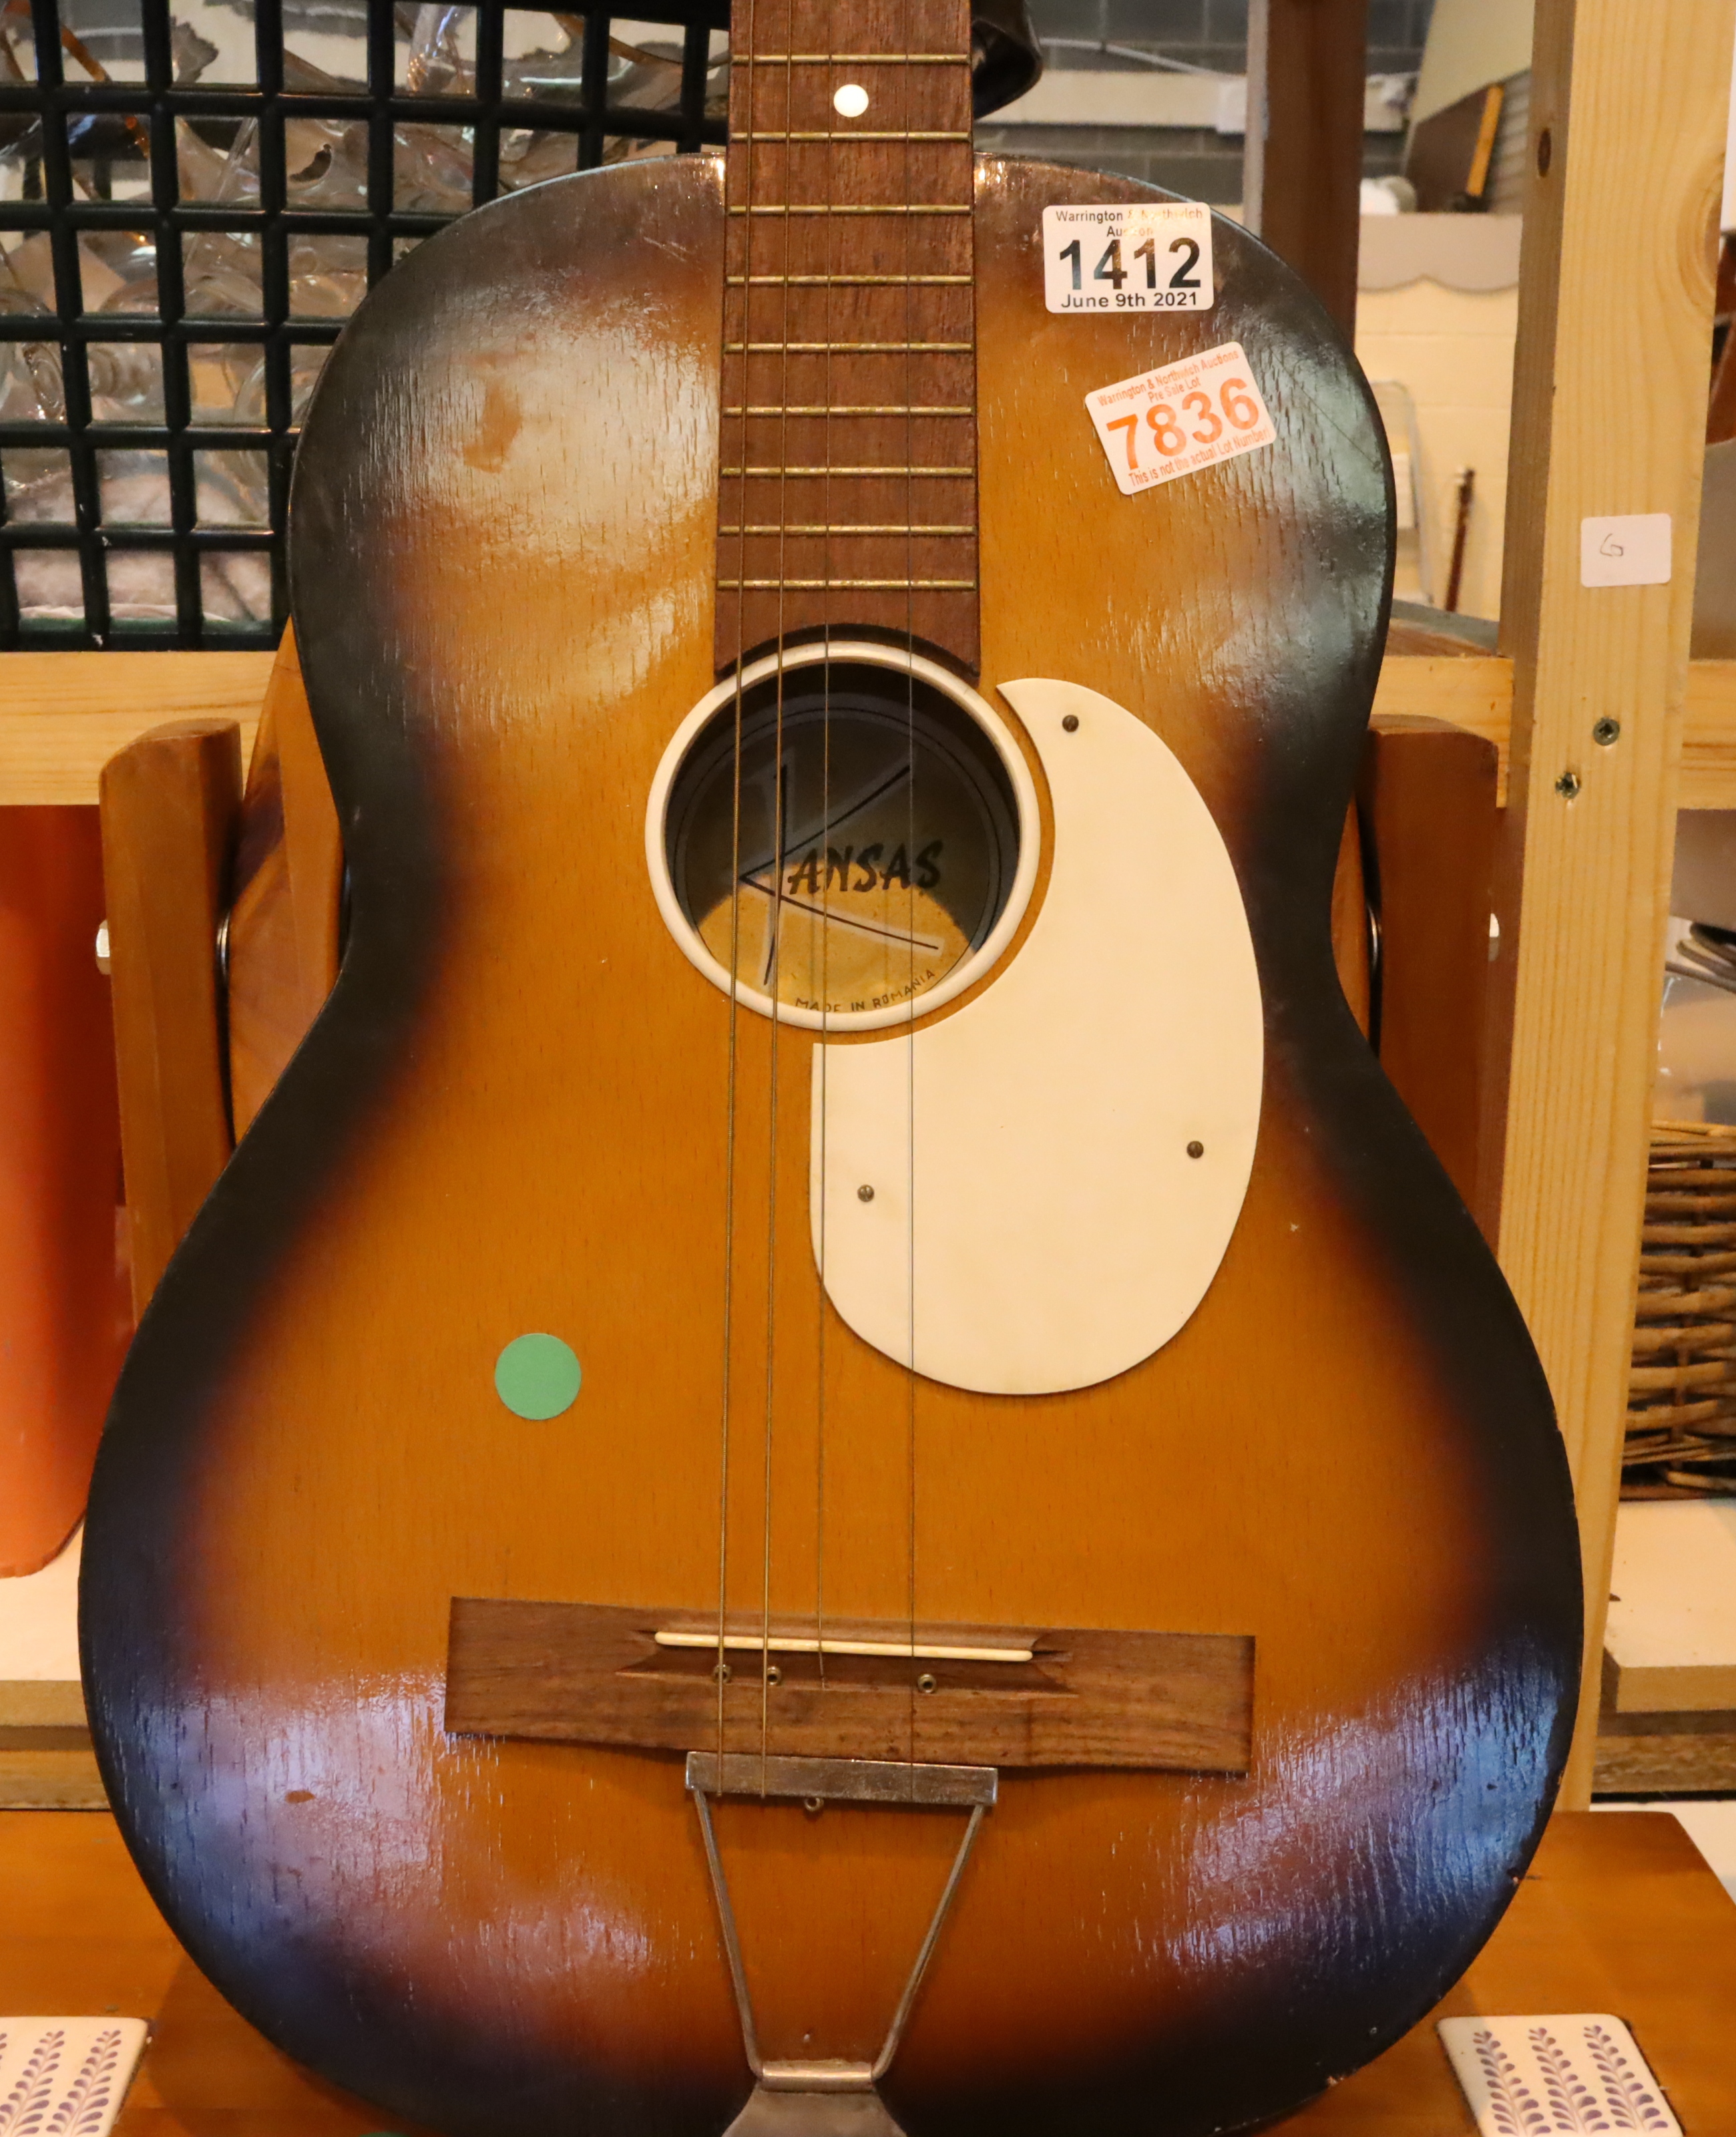 Three quarter sized six string acoustic guitar. Not available for in-house P&P, contact Paul O'Hea